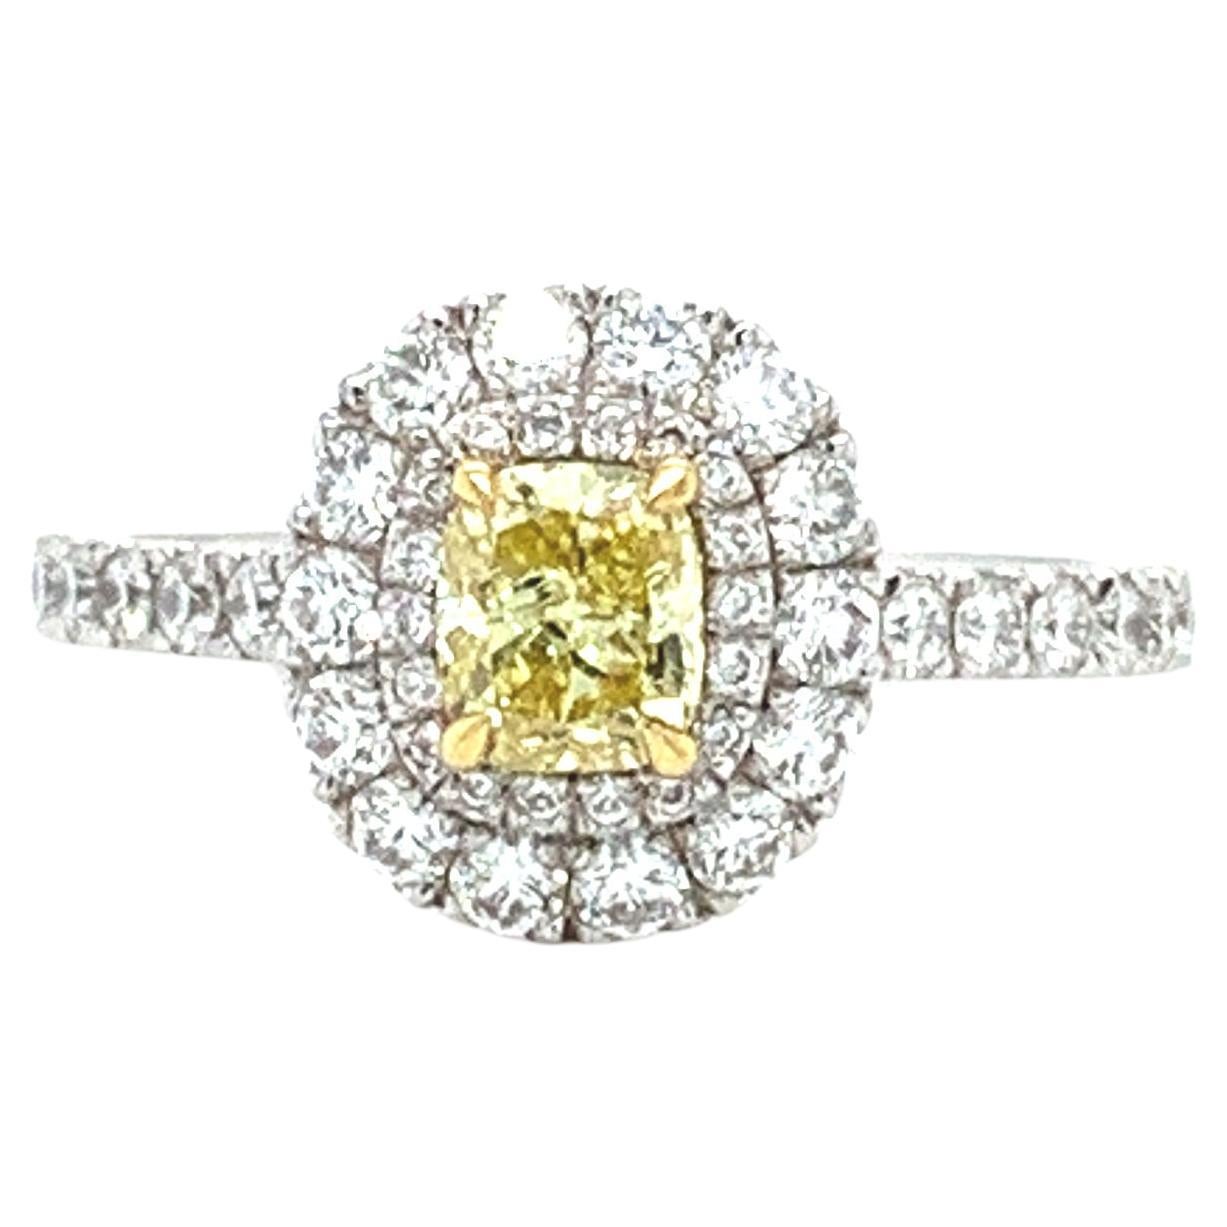 Fancy yellow diamond double halo engagement ring 18ct white gold For Sale